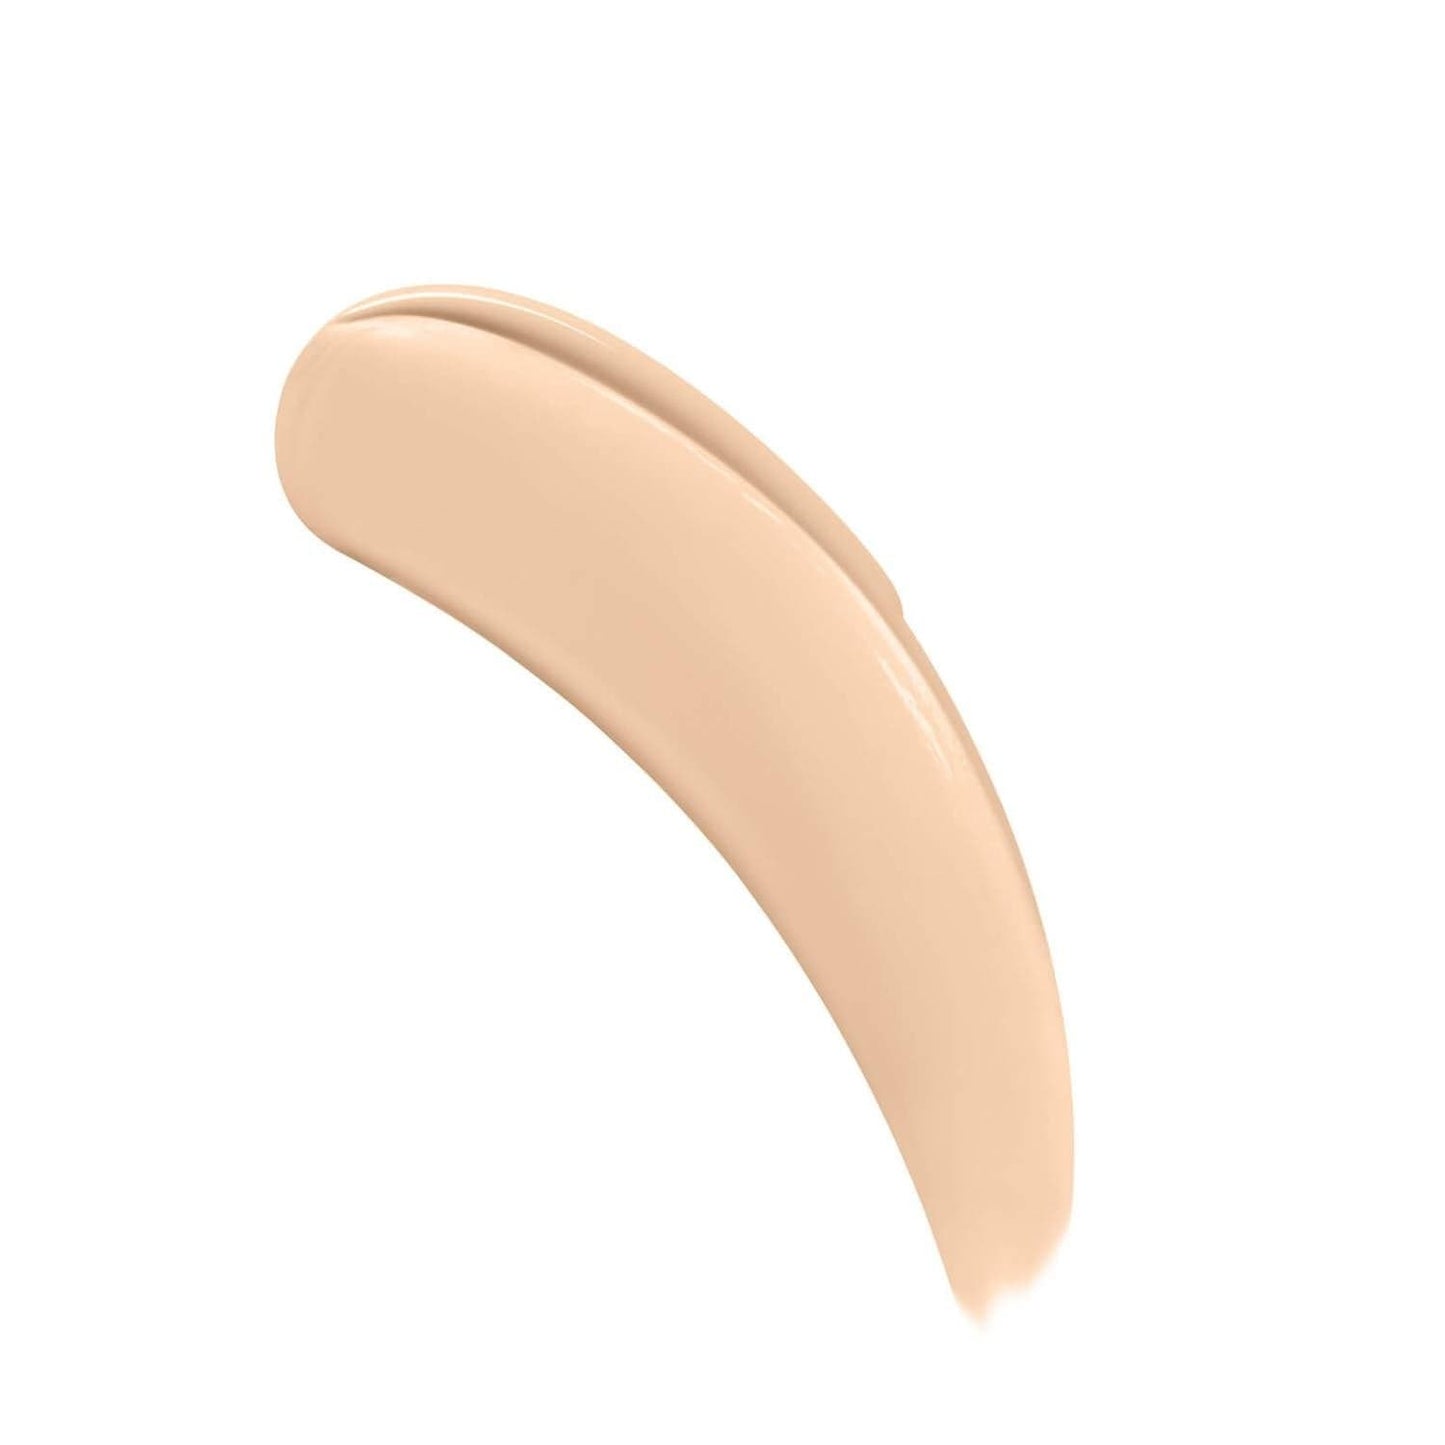 IT COSMETICS Beauty IT Cosmetics Your Skin But Better Foundation and Skincare 30ml - 11 Fair Neutral